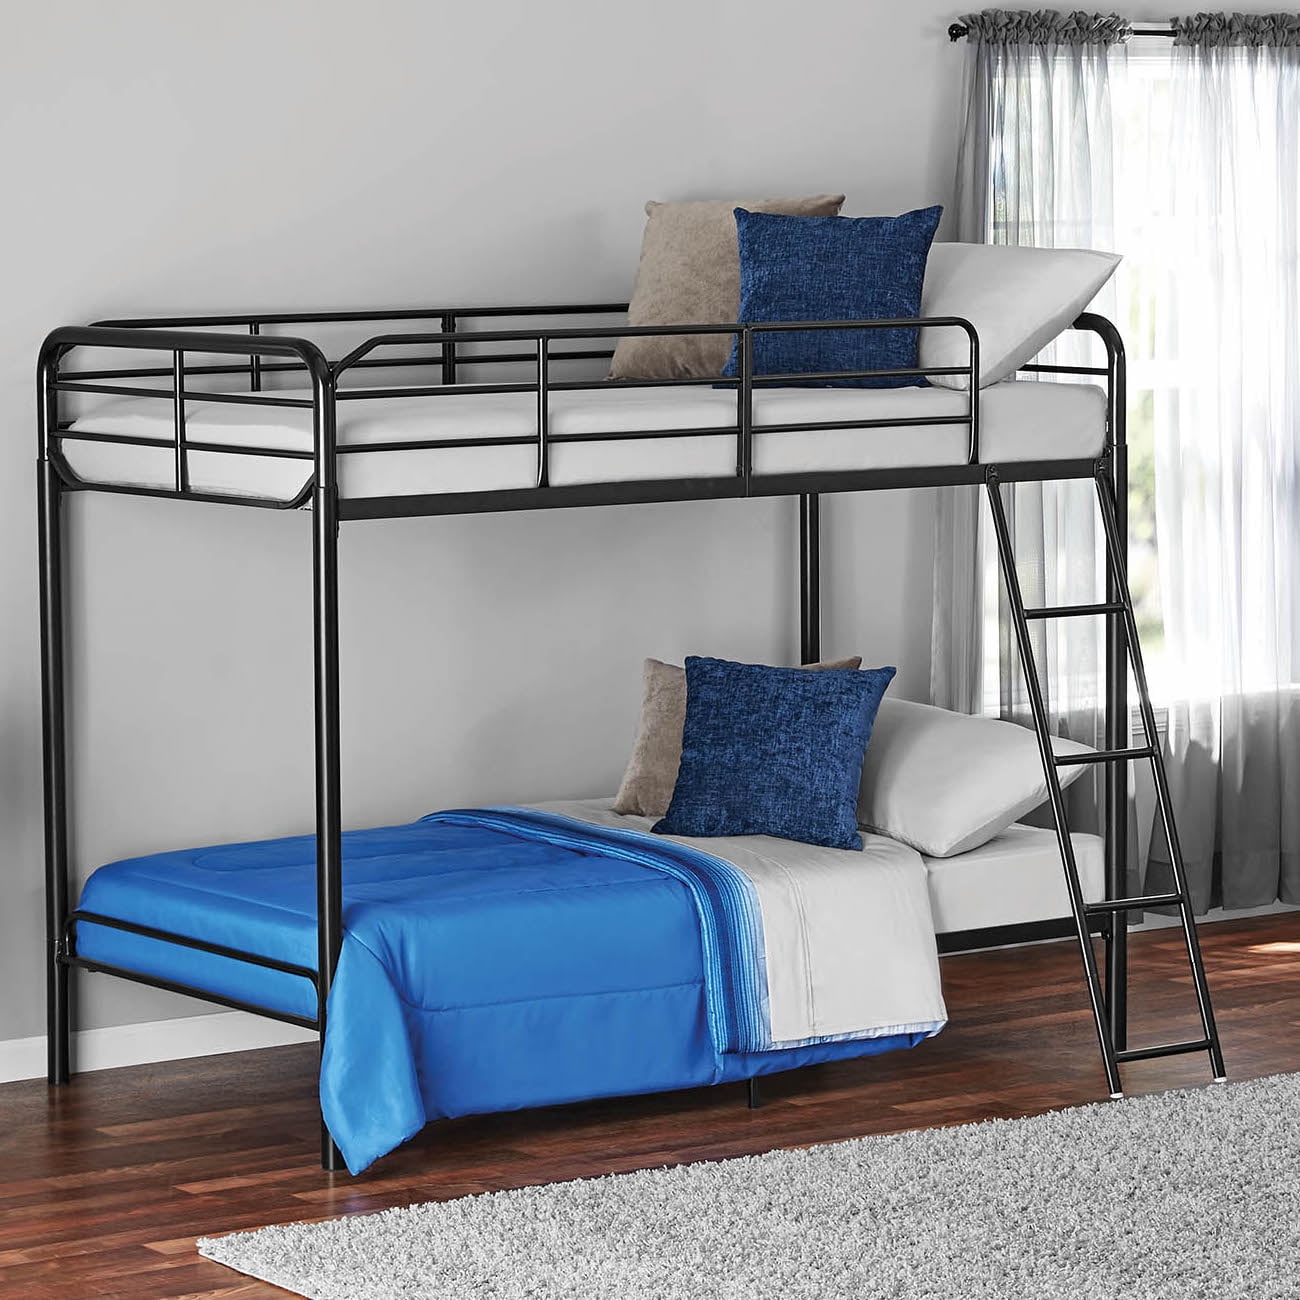 Mainstays Twin Over Metal Bunk Bed, Metal Bunk Bed Twin Over Double